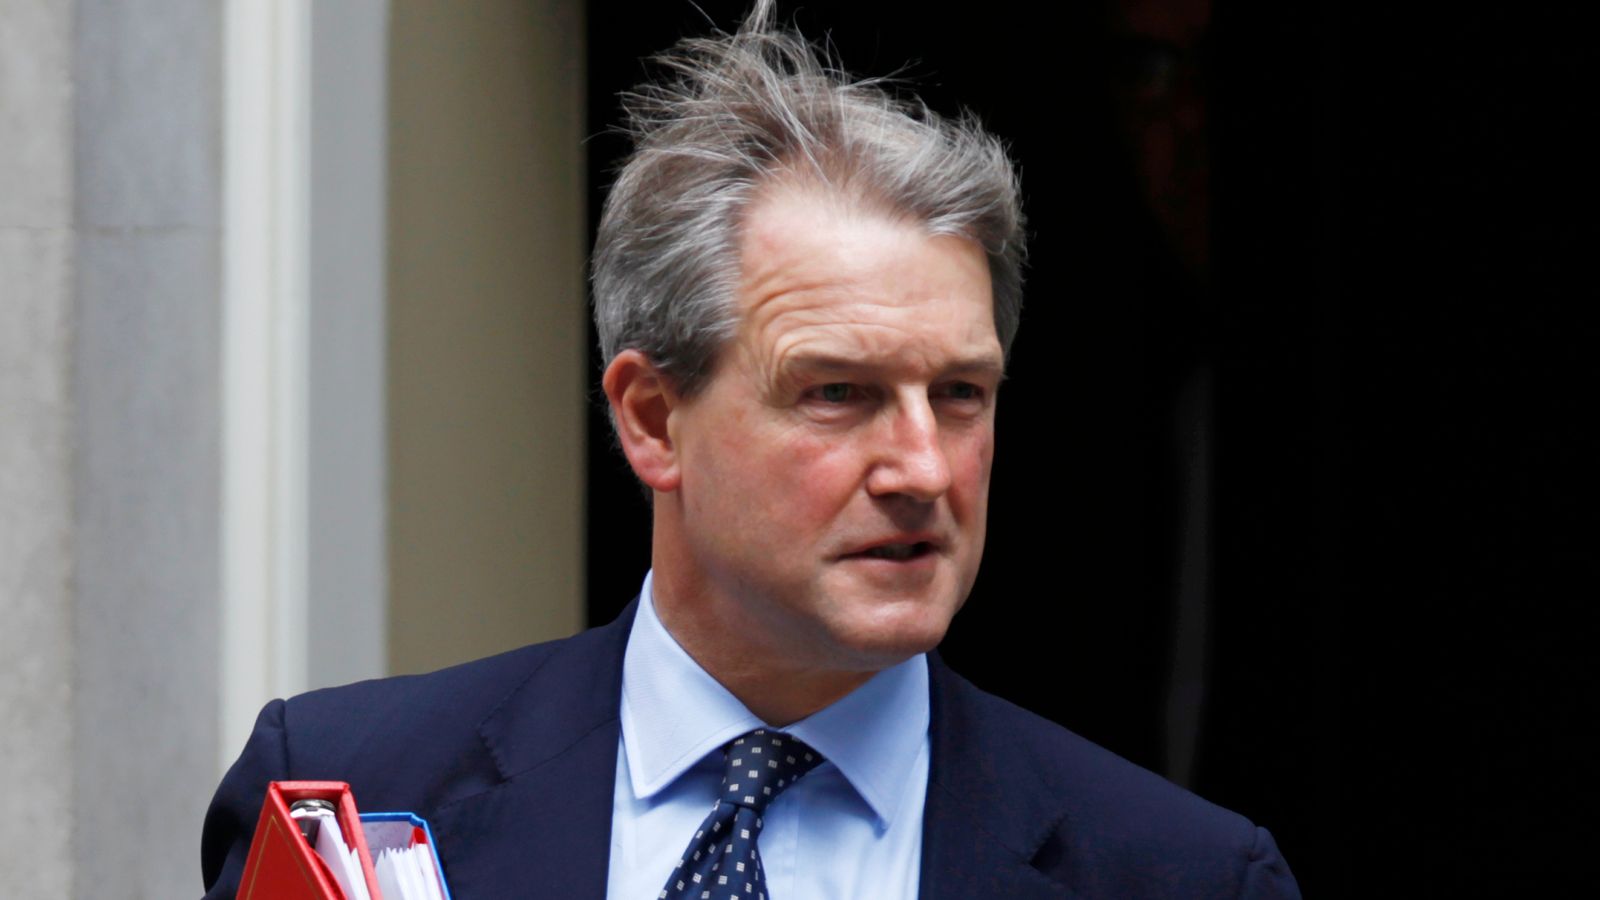 Brexiteer Owen Paterson sues government in European Court of Human Rights over ‘unfair’ lobbying investigation